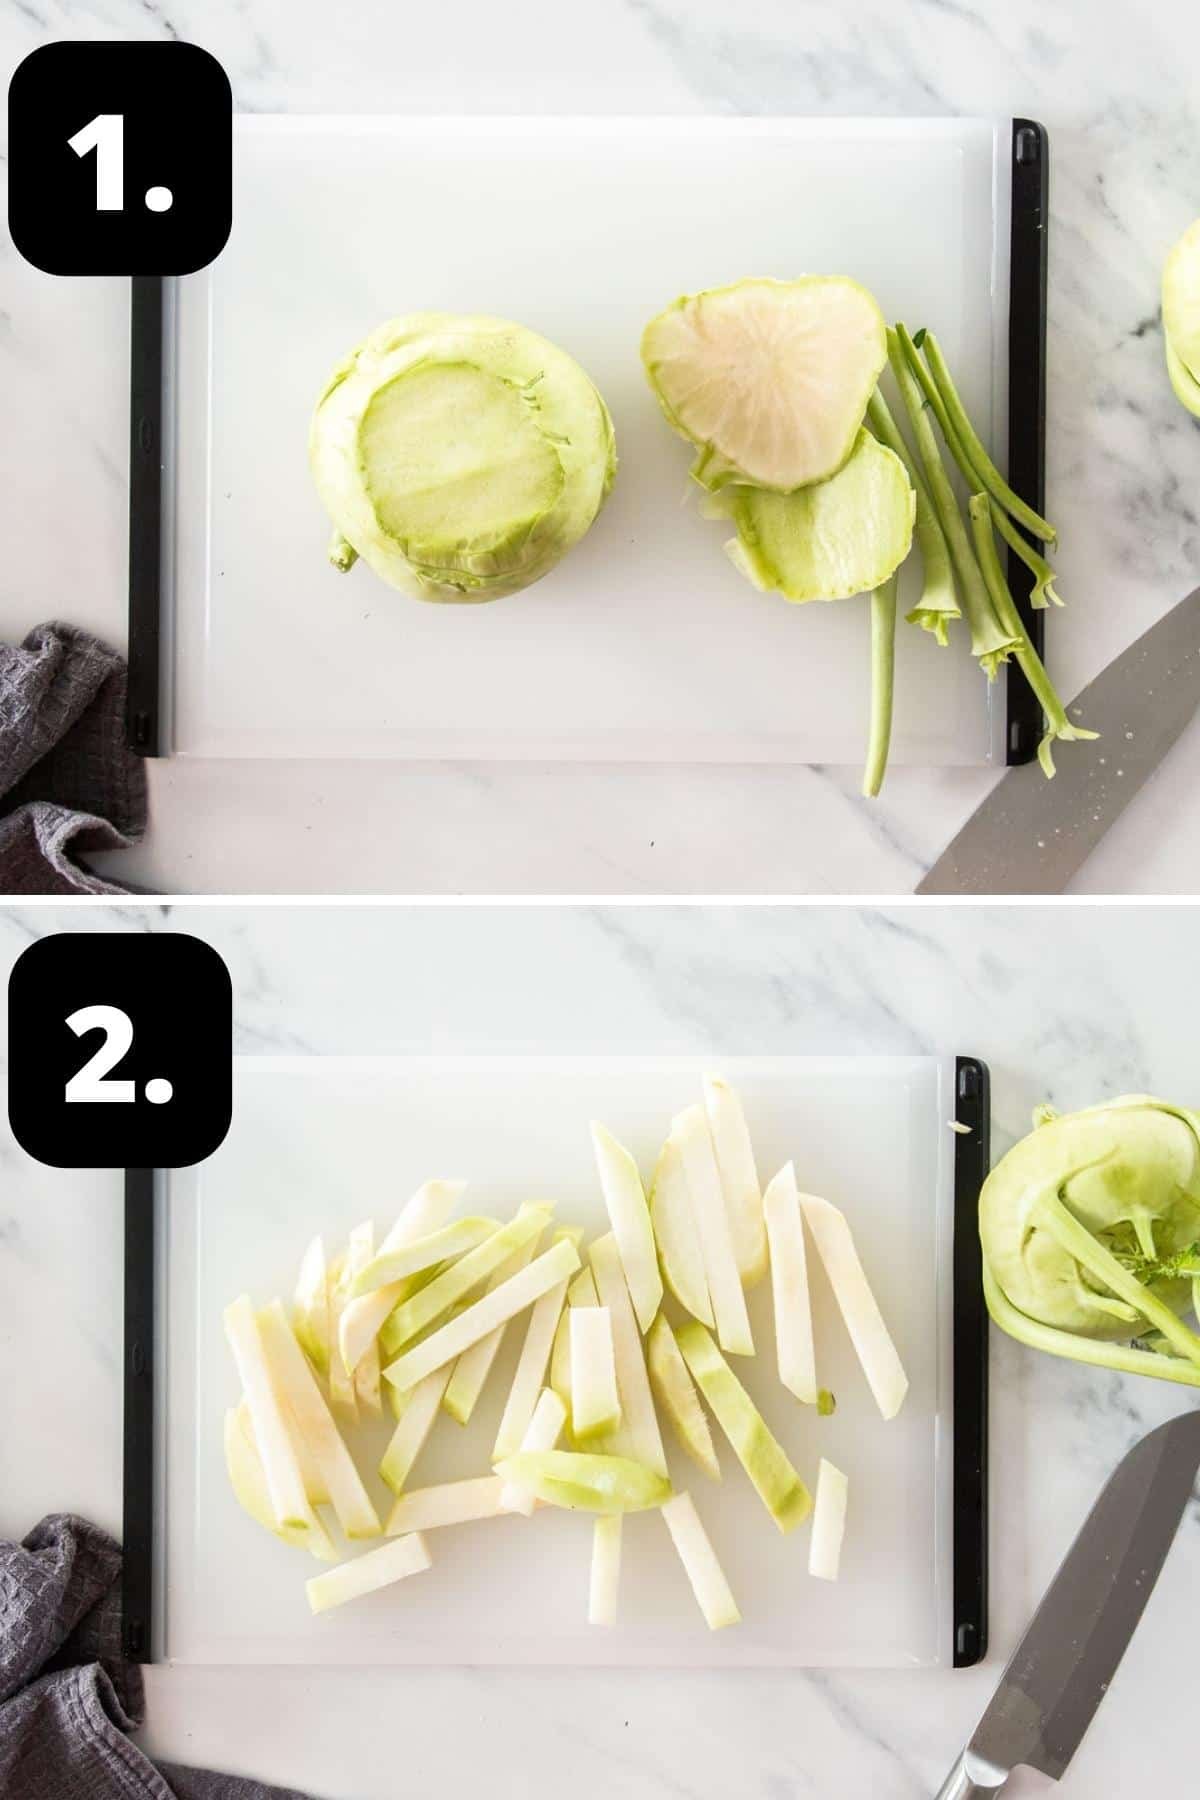 Steps 1-2 of preparing this recipe - peeling the kohlrabi and cutting it into pieces.